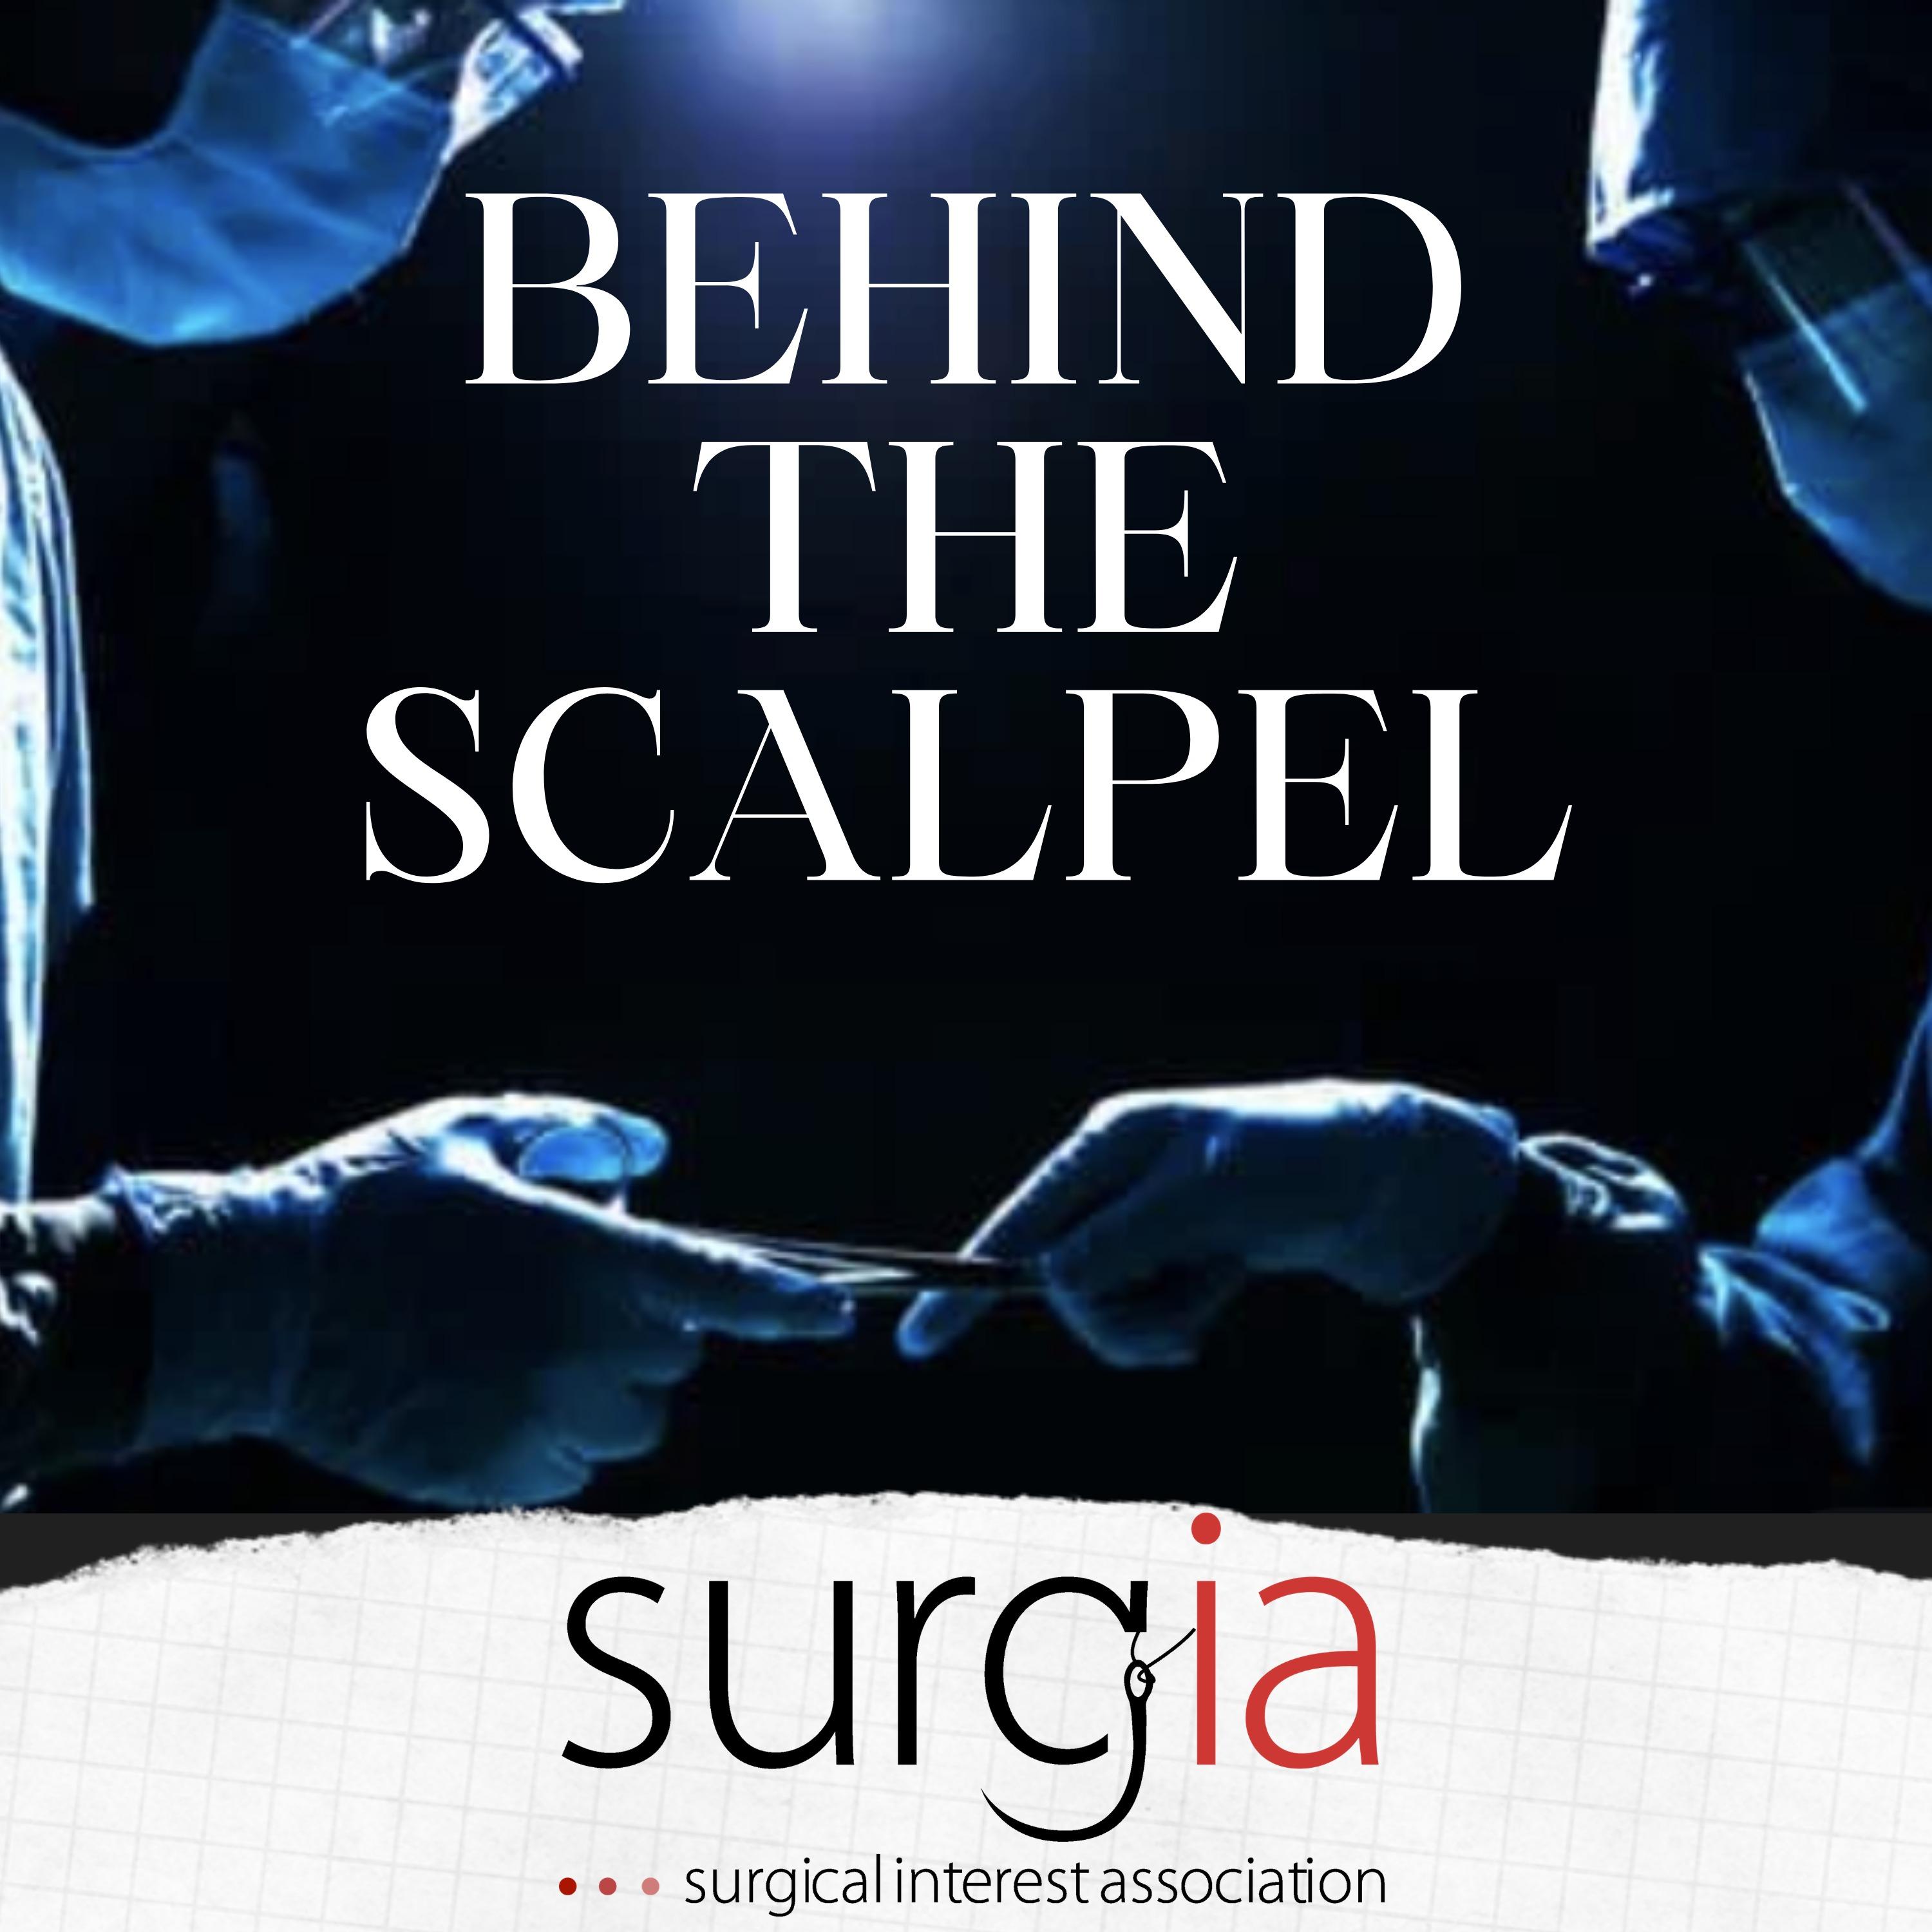 Behind The Scalpel